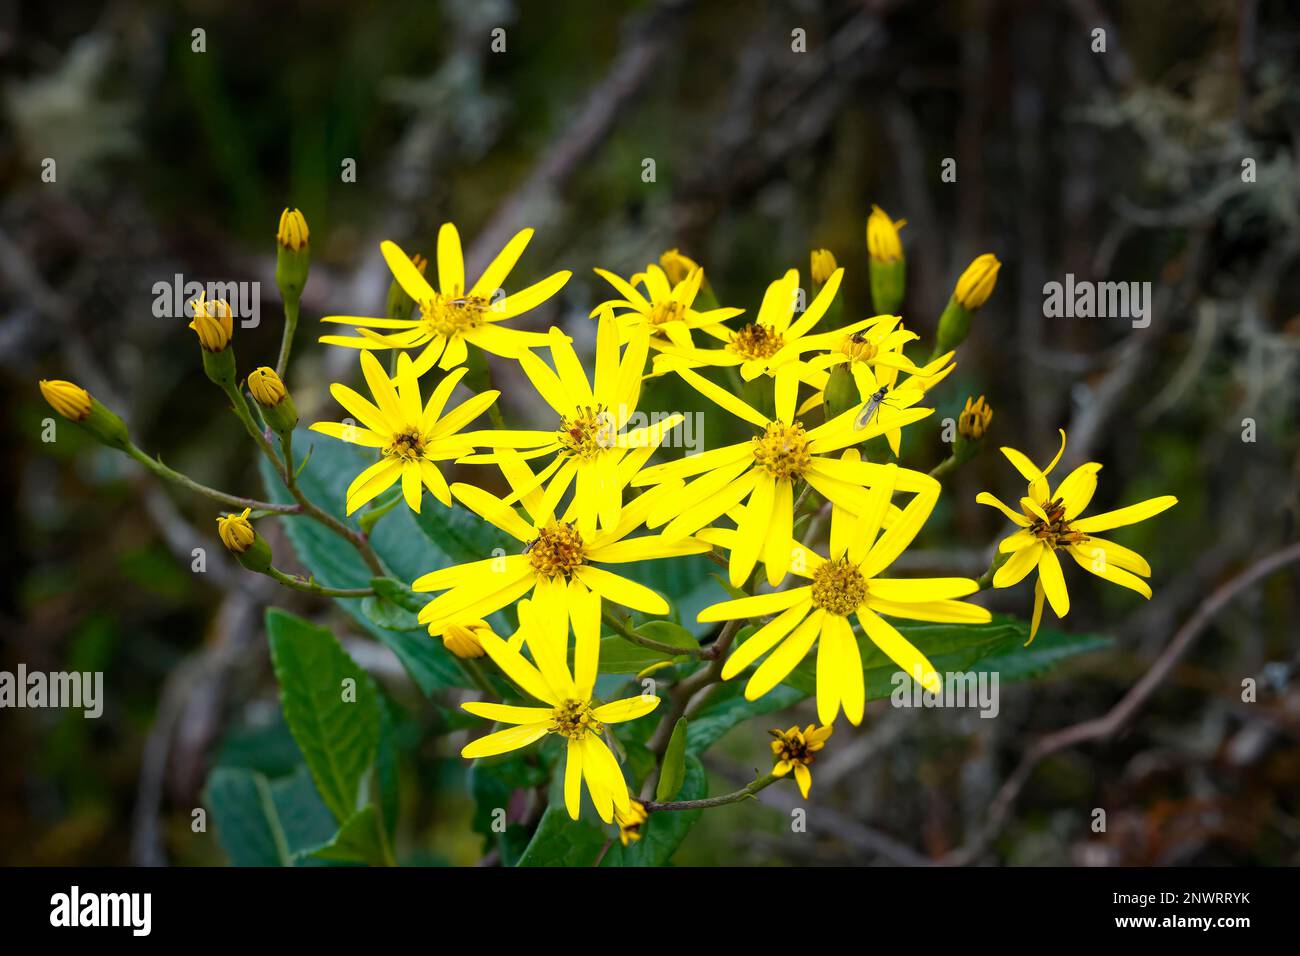 Packera aurea (Asteraceae family), Typical plant from Tropical Cloud Forest, Manu National Park, Peru Stock Photo